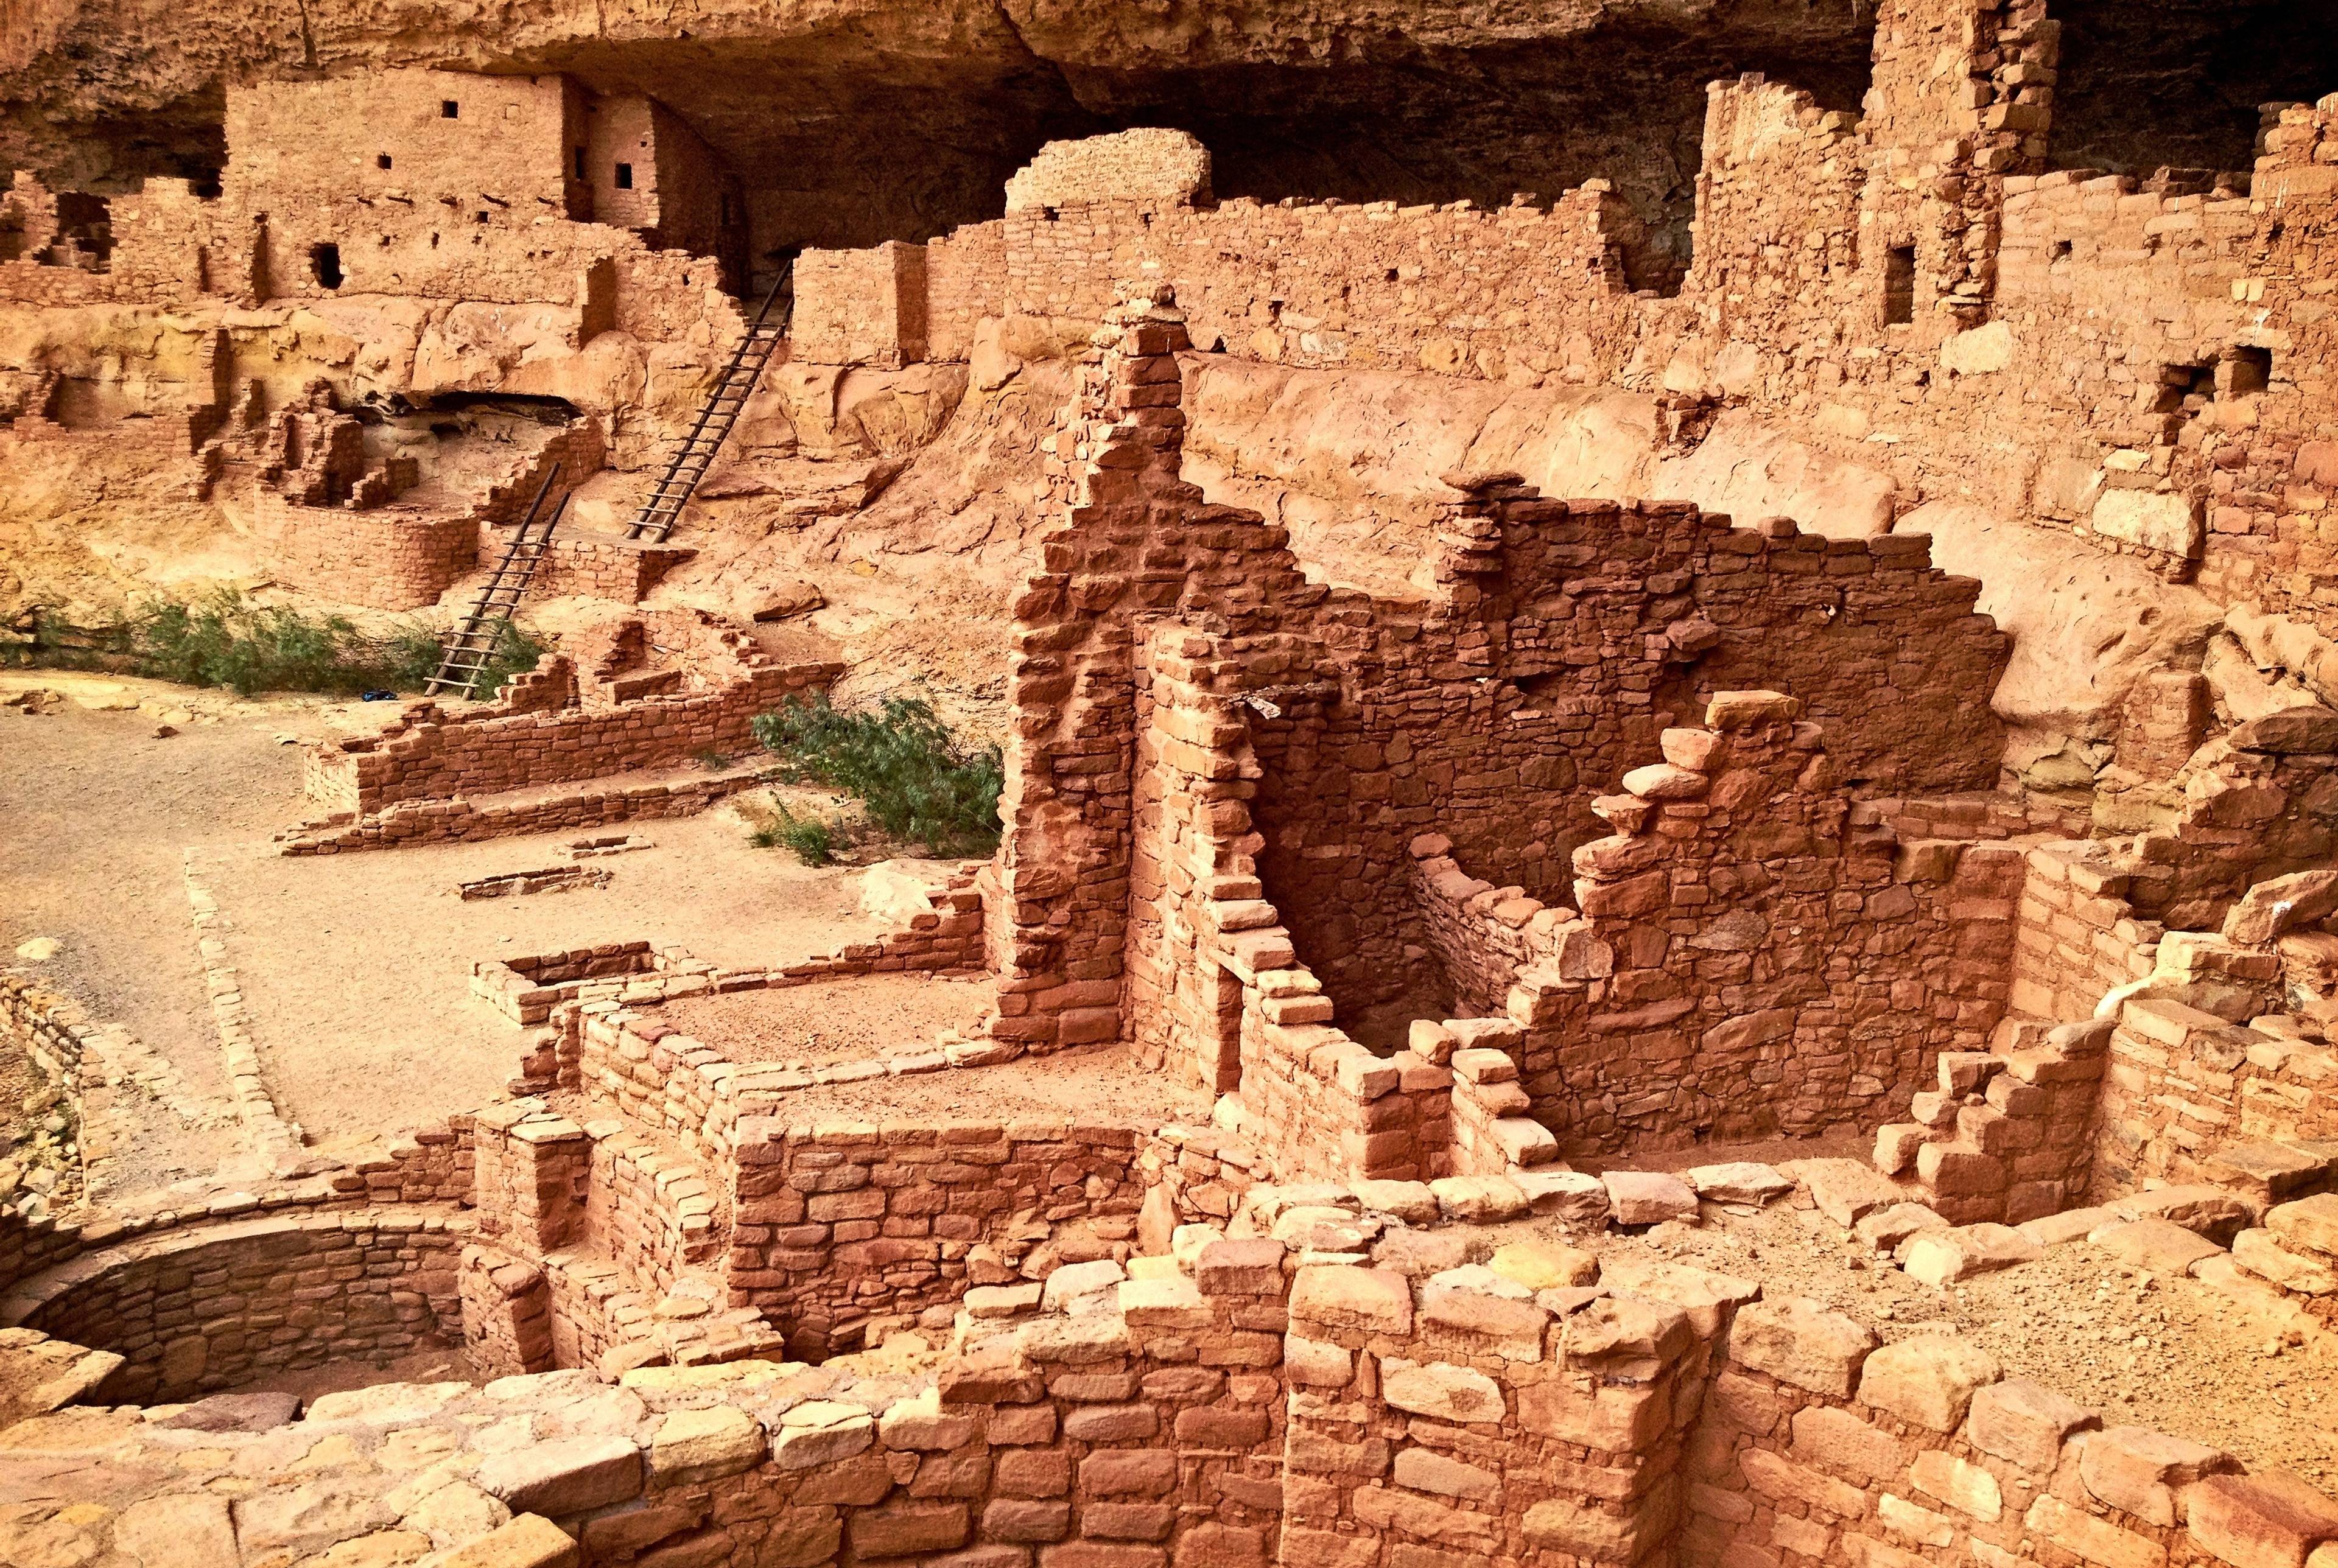 ⚡️ Explore the Cliff Dwellings in Mesa Verde National Park